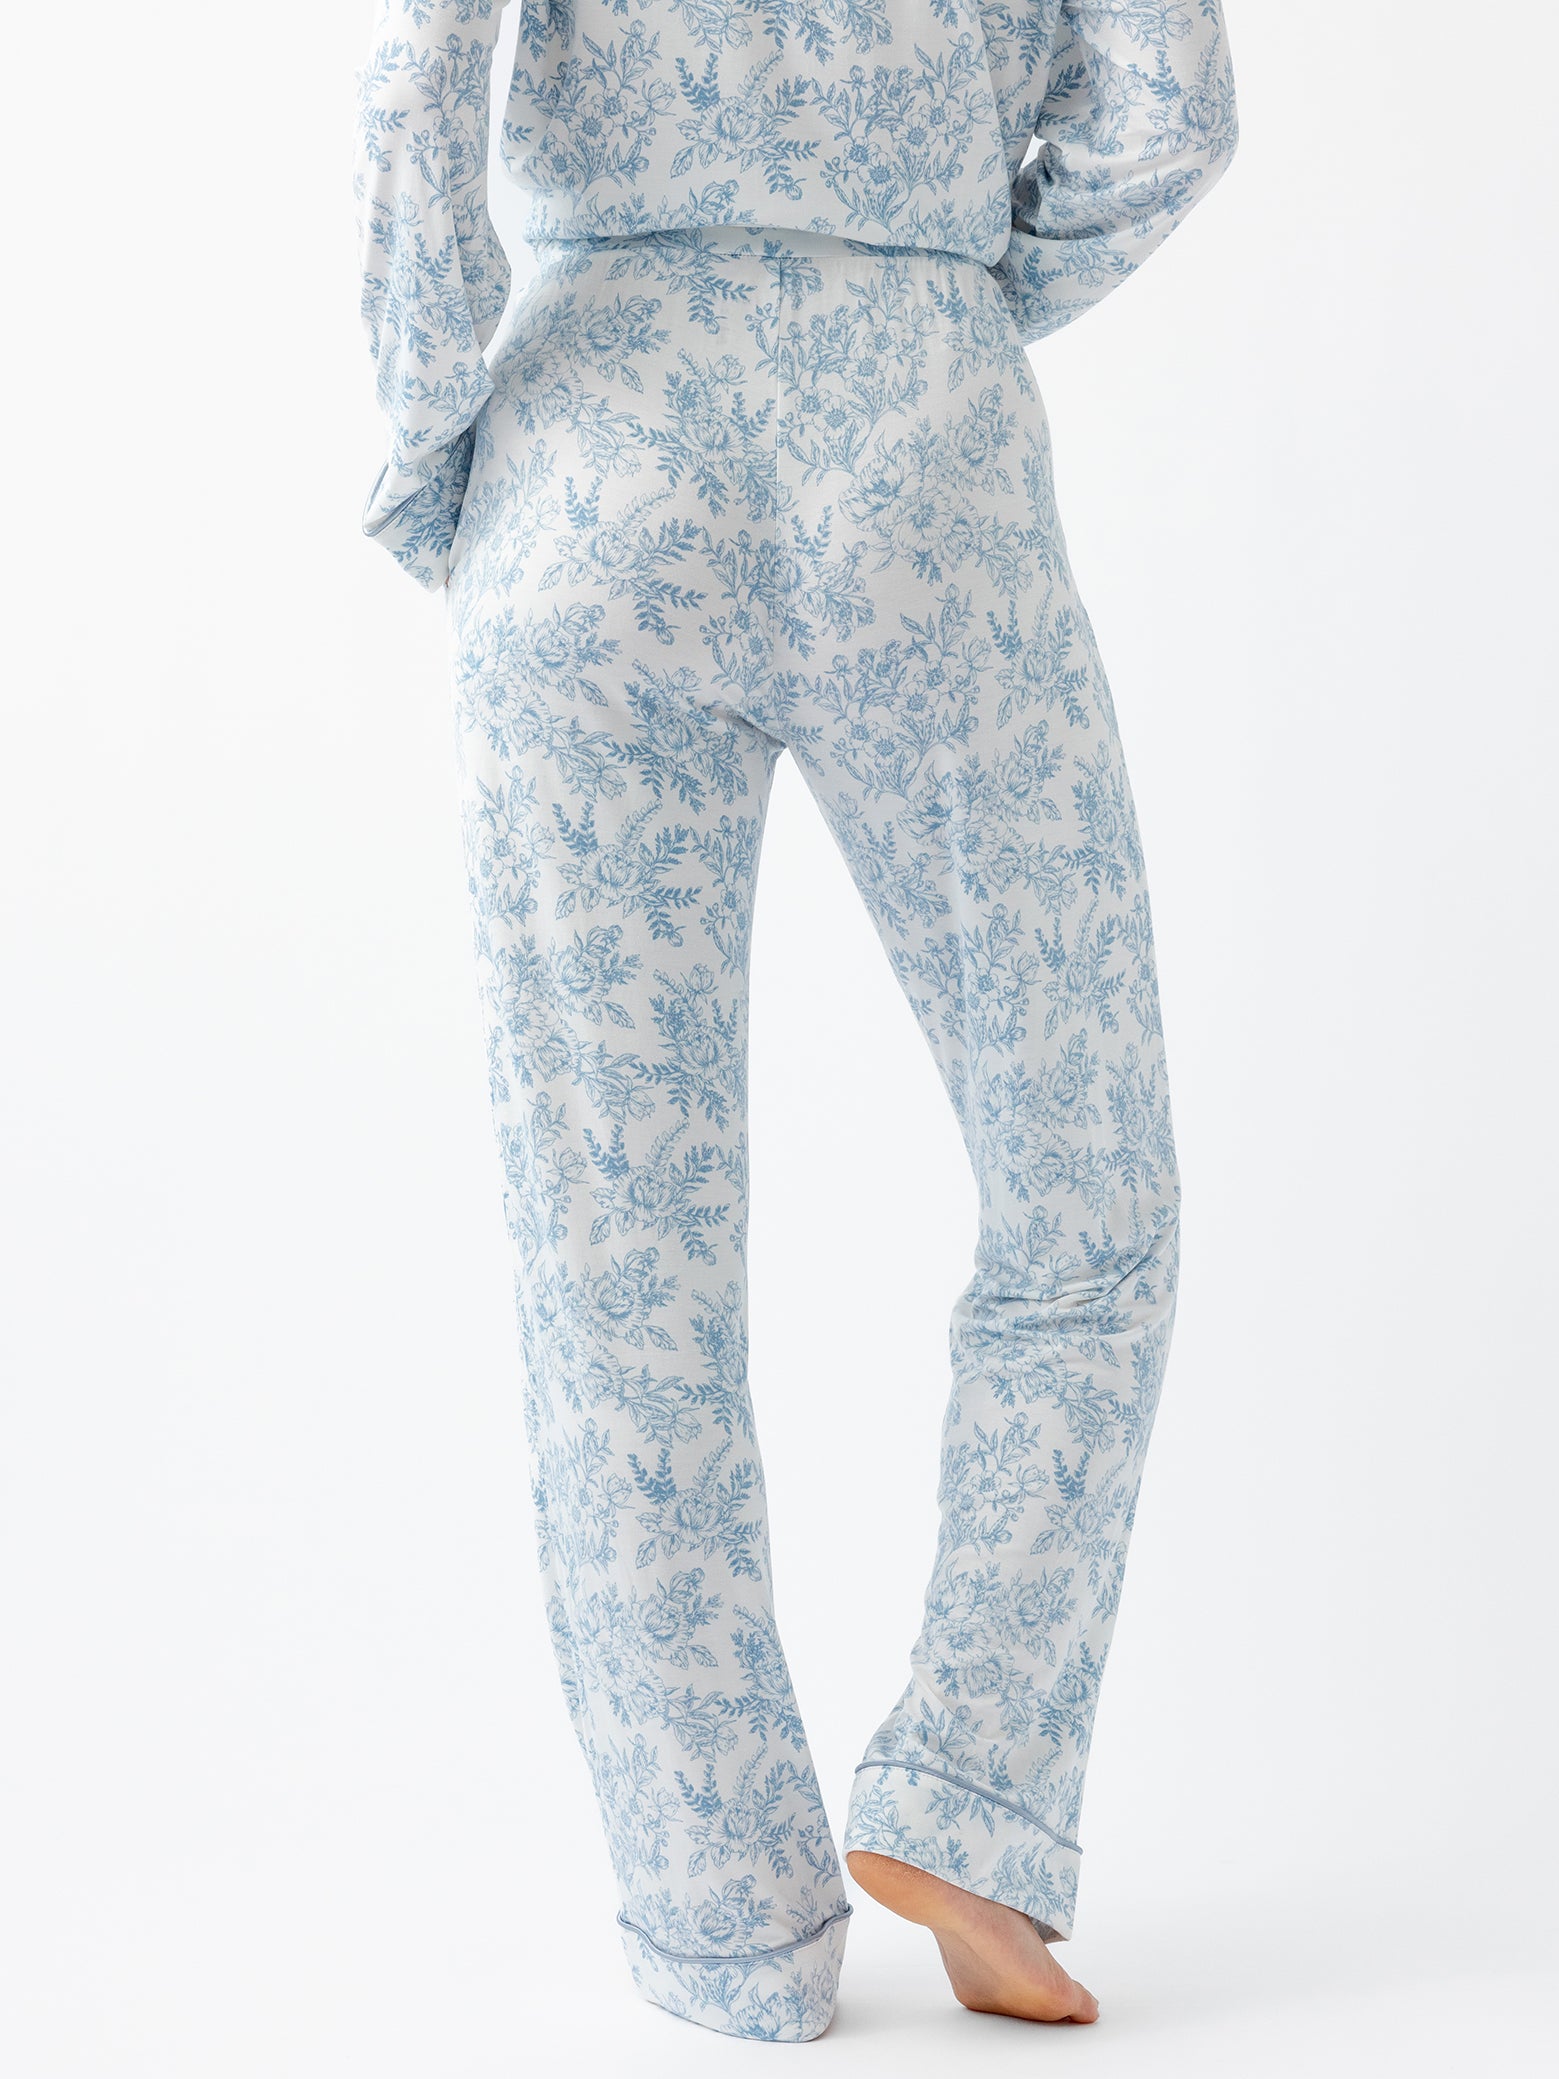 Back of woman in blue toile pajama pants 